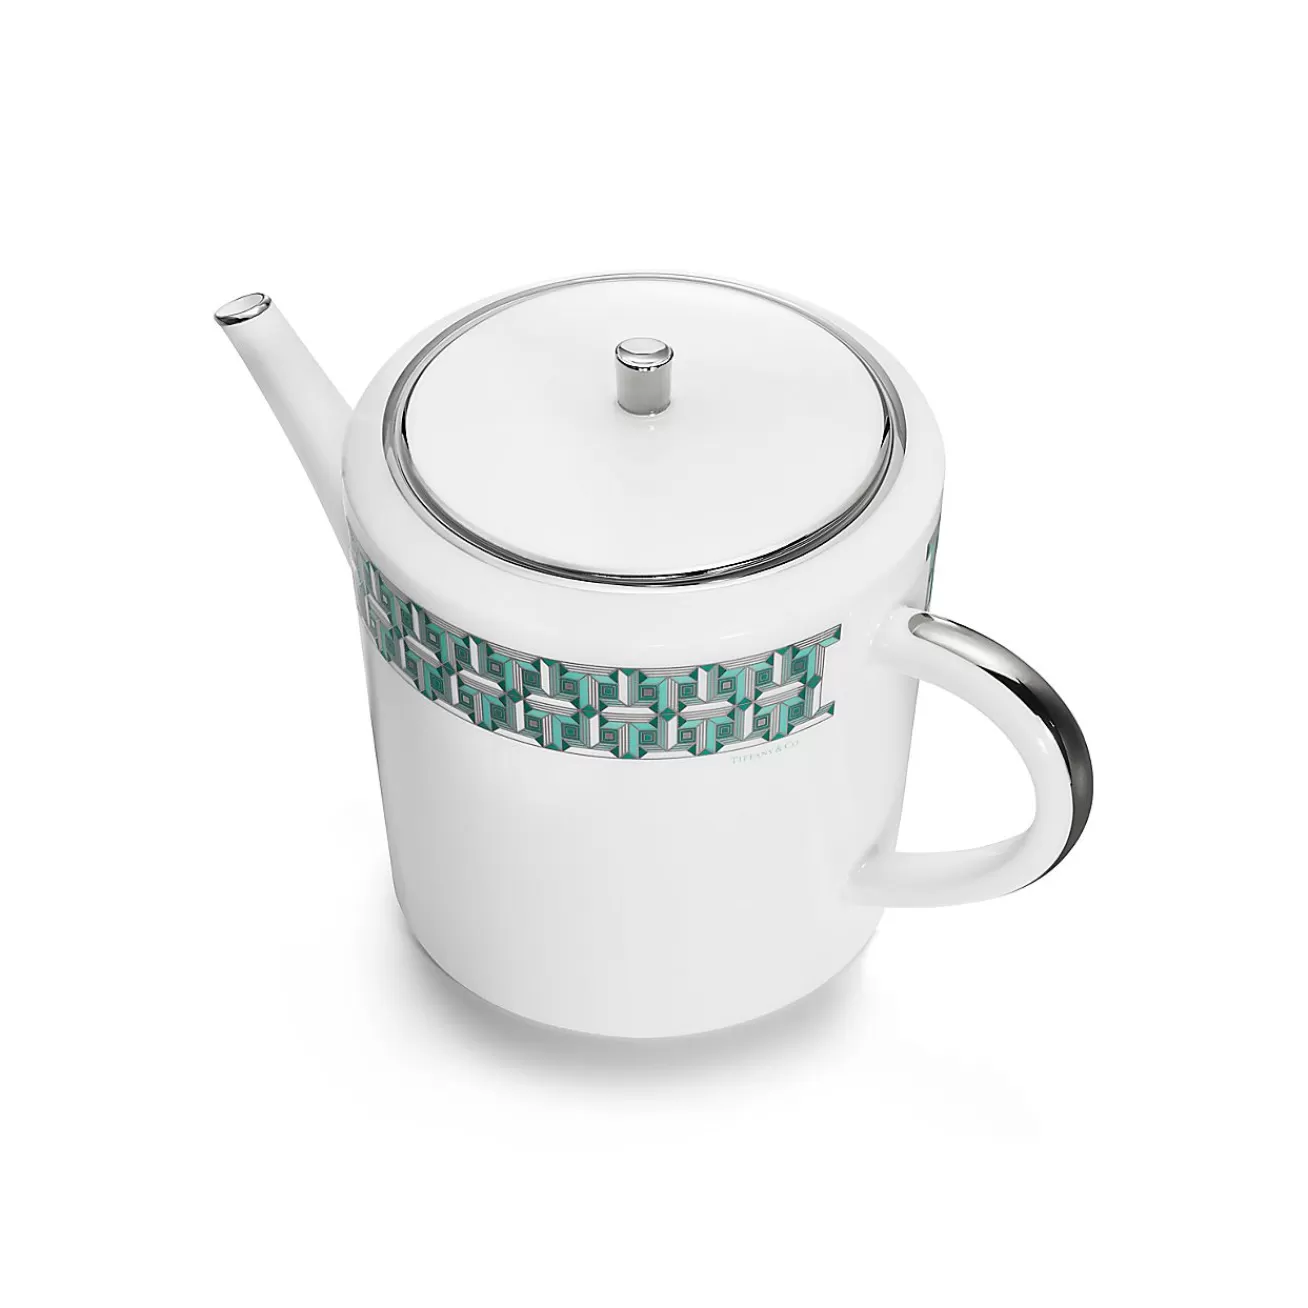 Tiffany & Co. Tiffany Blue Tiffany T True Teapot with a Hand-painted Platinum Rim | ^ The Home | Housewarming Gifts